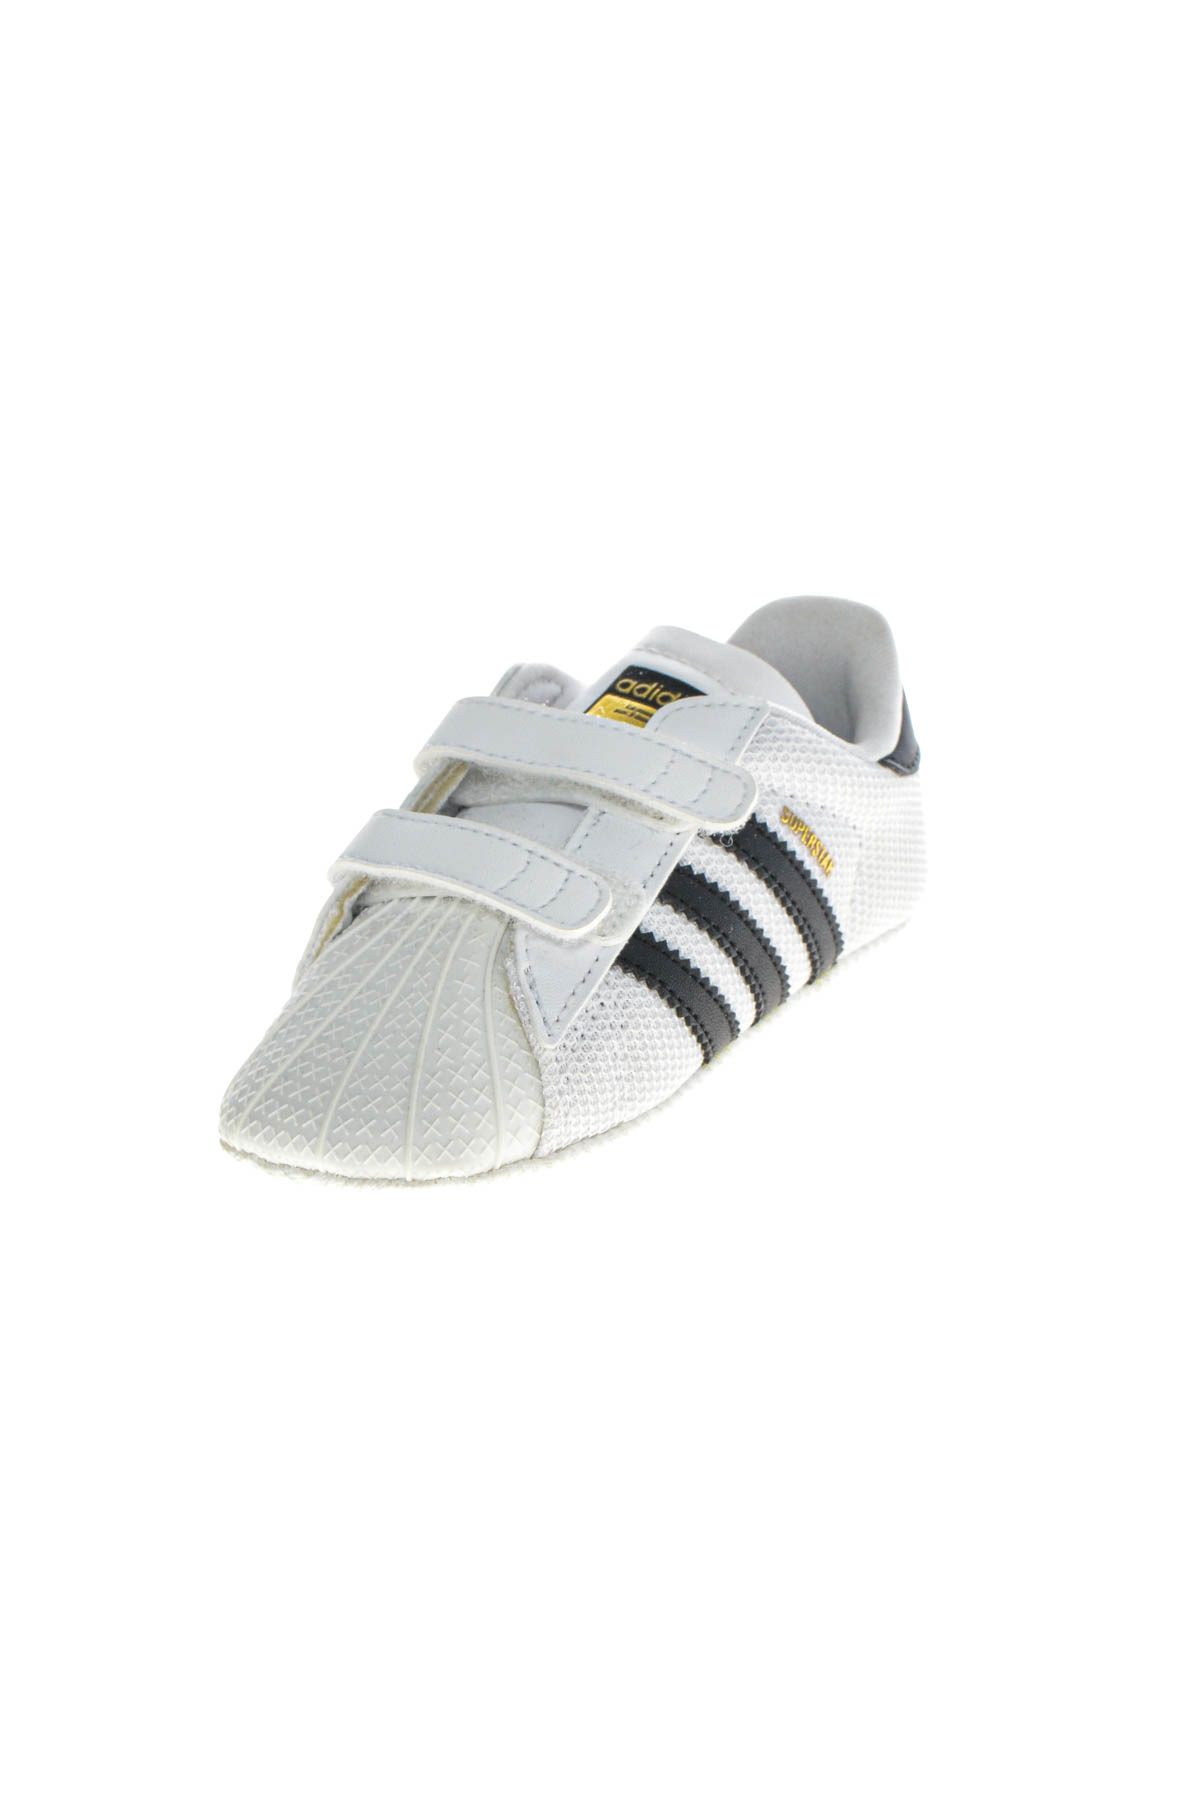 Baby boots - Adidas - 1